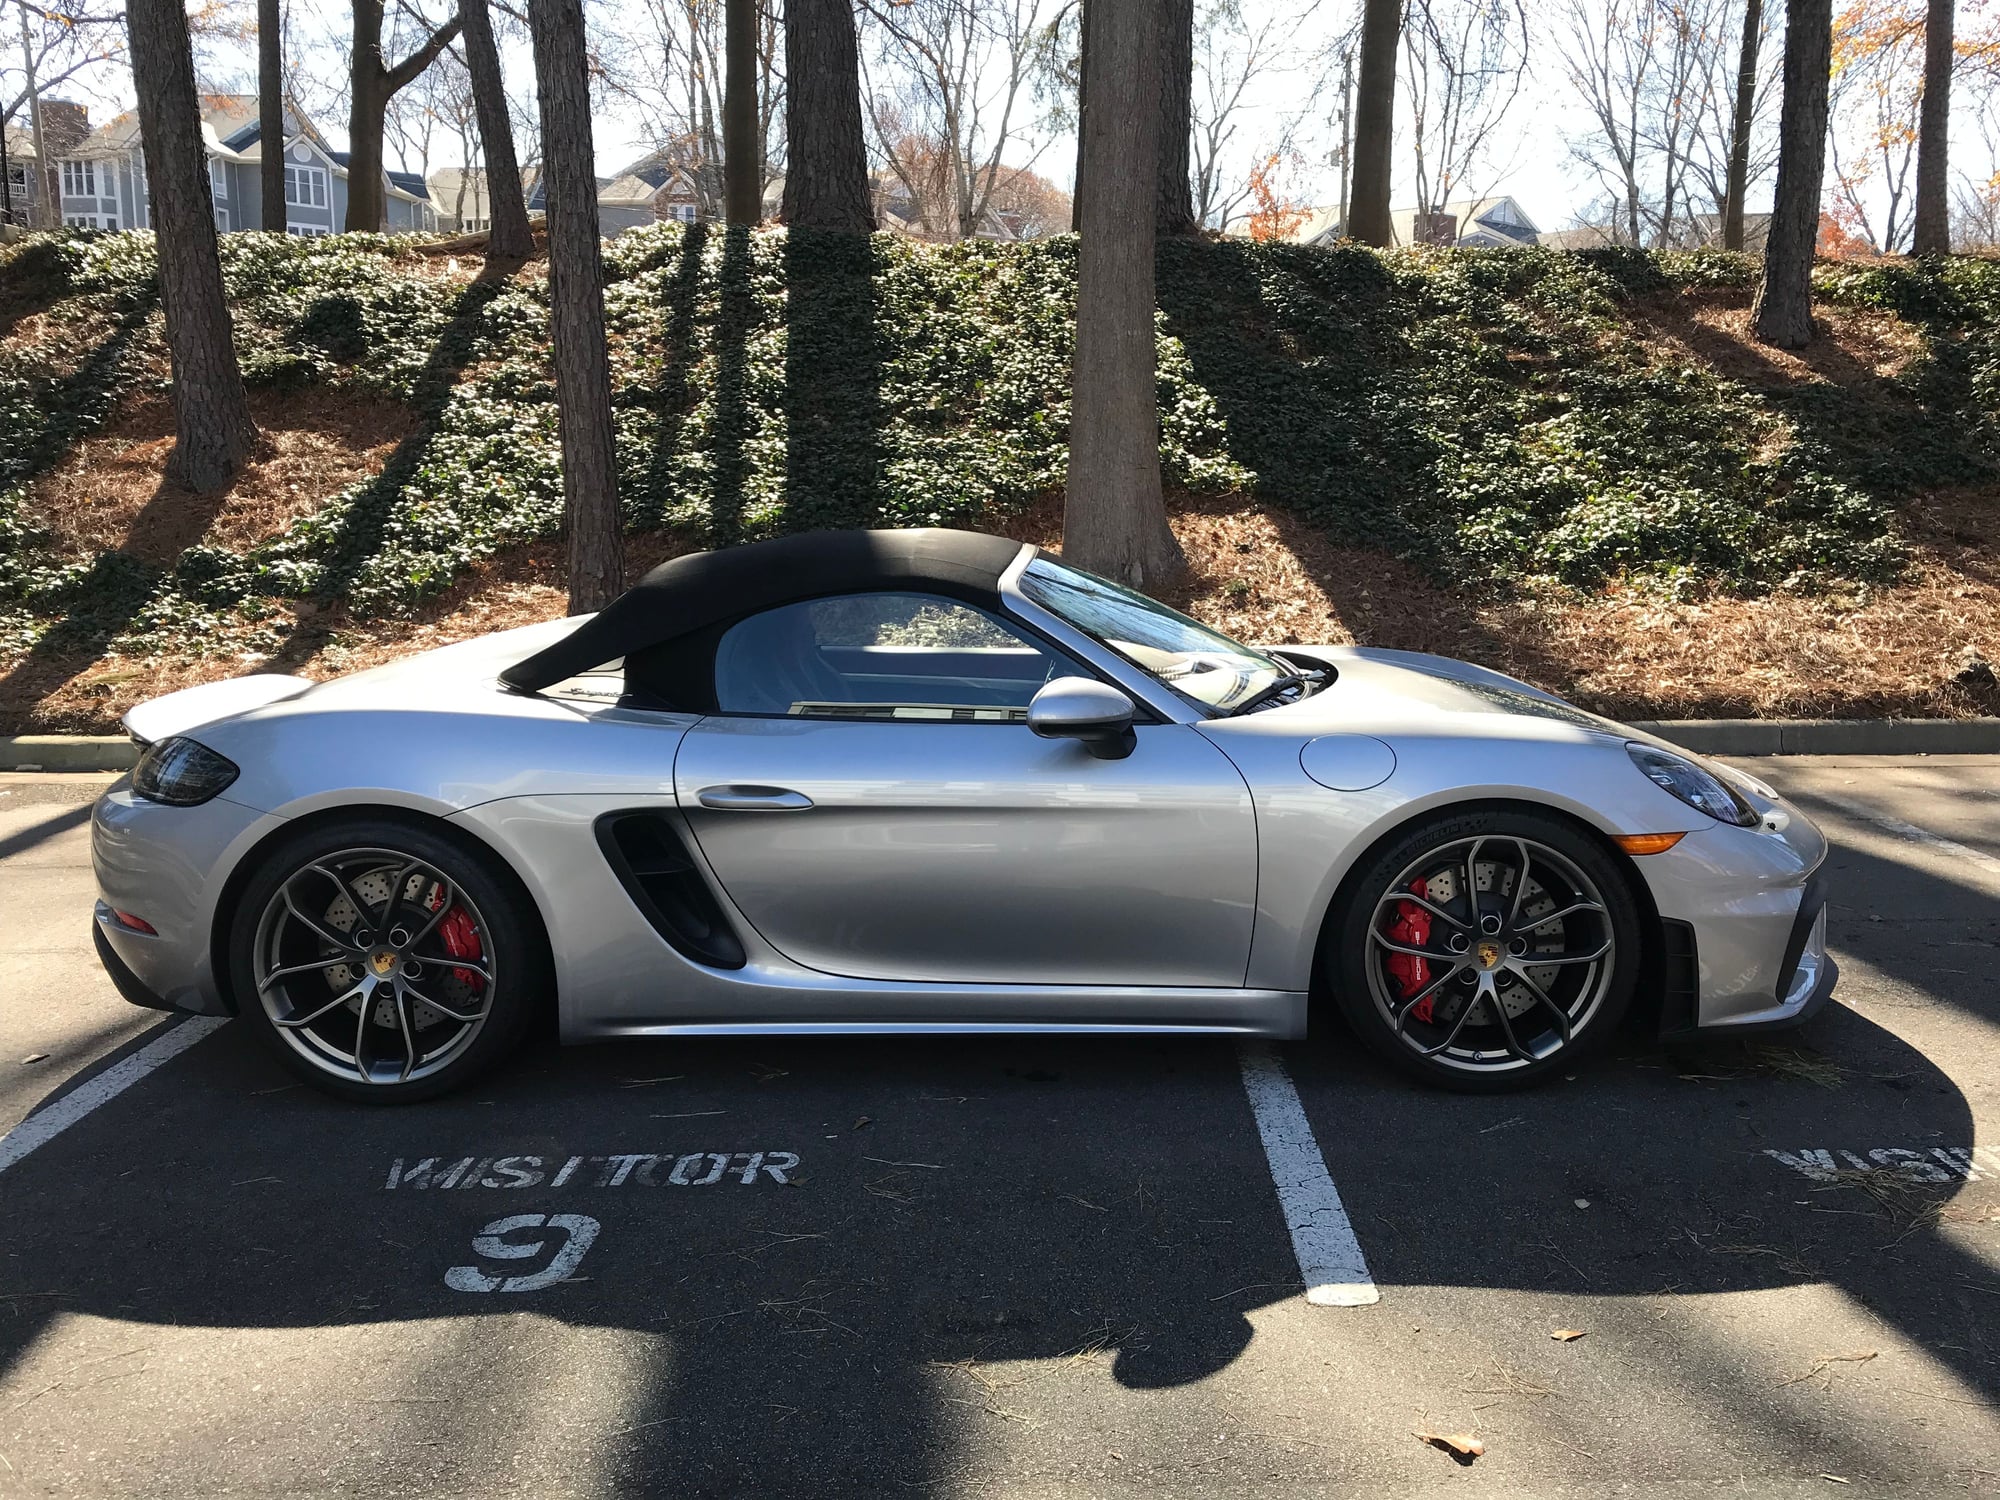 2021 Porsche 718 Spyder -  - Used - VIN WP0CC2A84MS240392 - 1,745 Miles - 6 cyl - 2WD - Manual - Convertible - Silver - Raleigh, NC 27605, United States